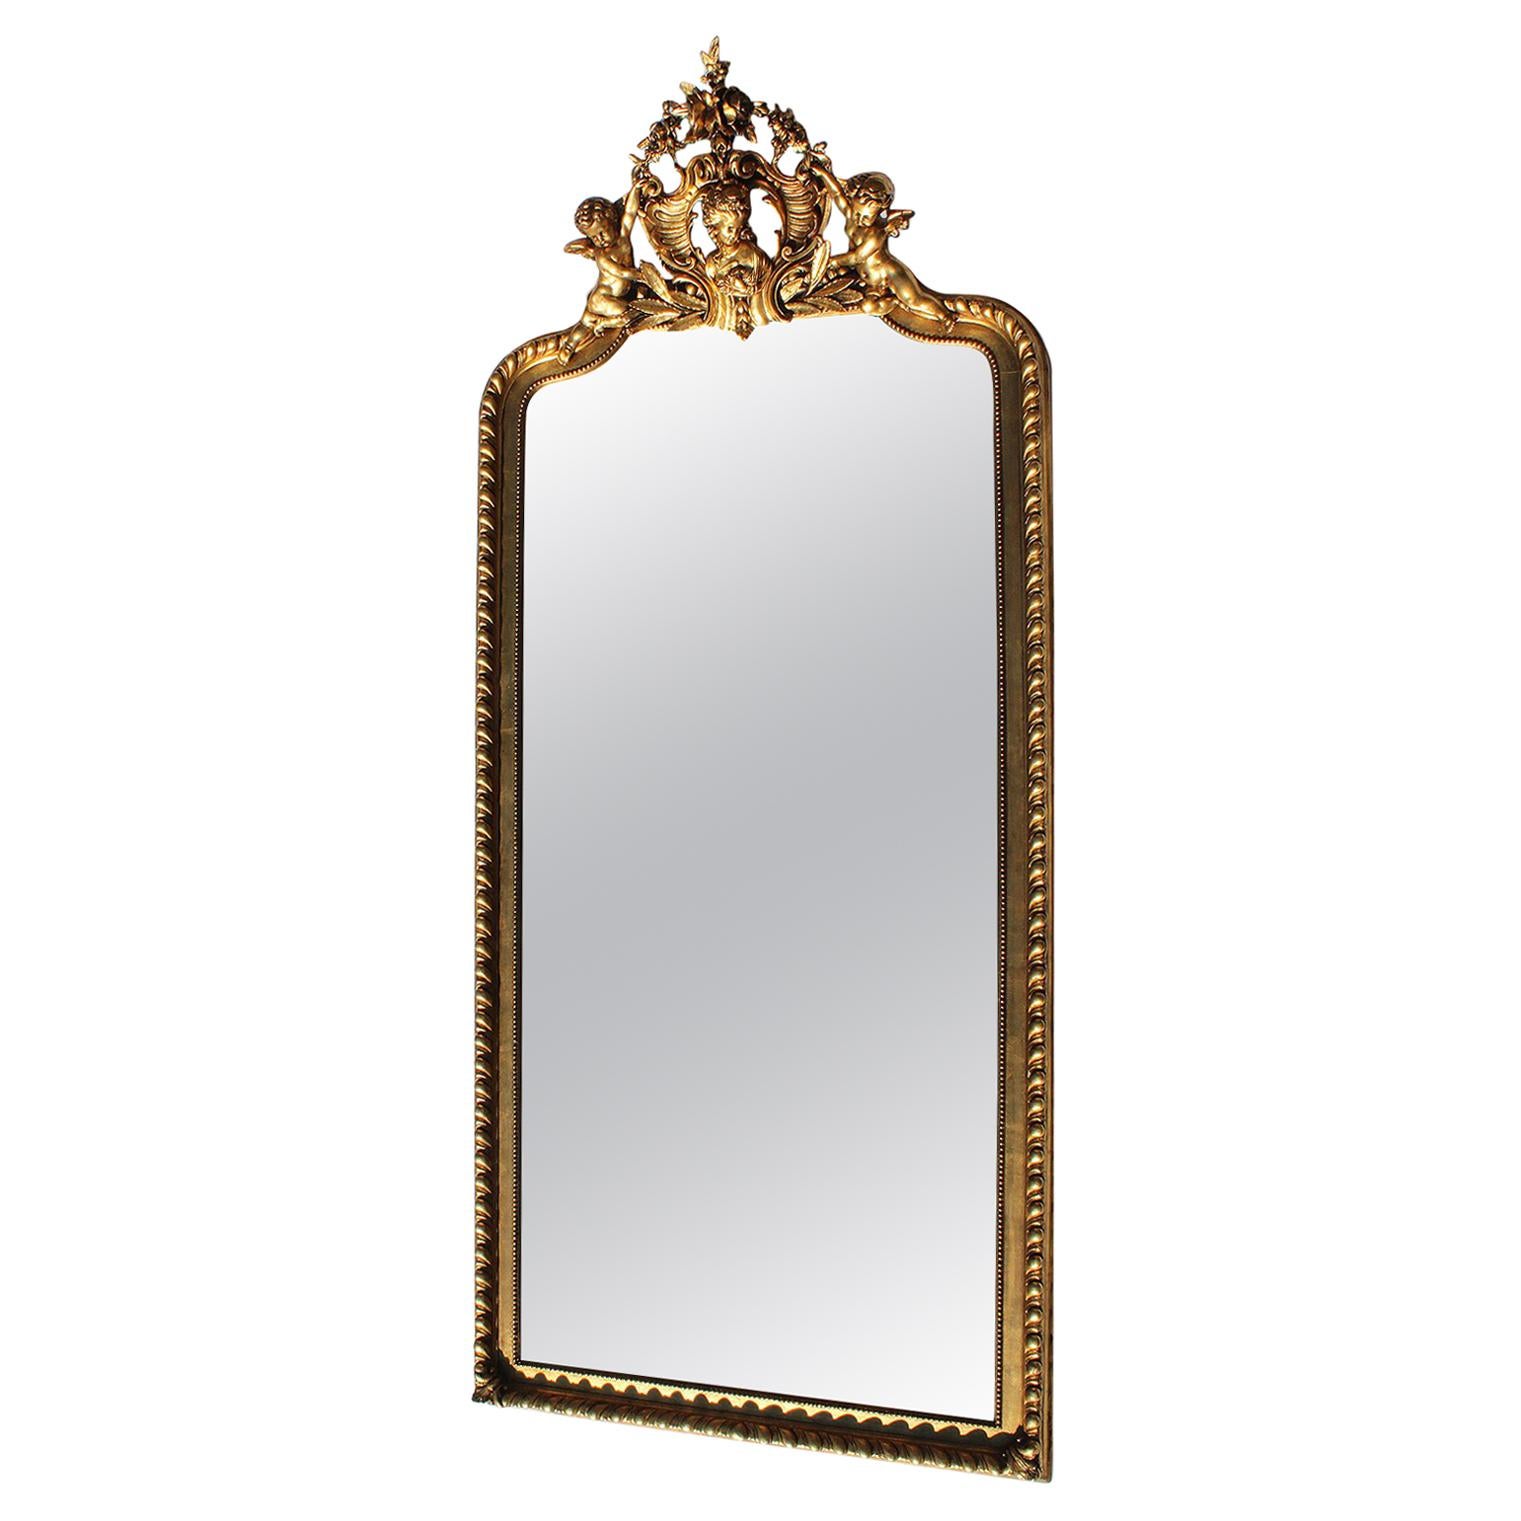 Tall French 19th-20th Century Giltwood and Gesso Carved Grand-Hall Cherub Mirror For Sale